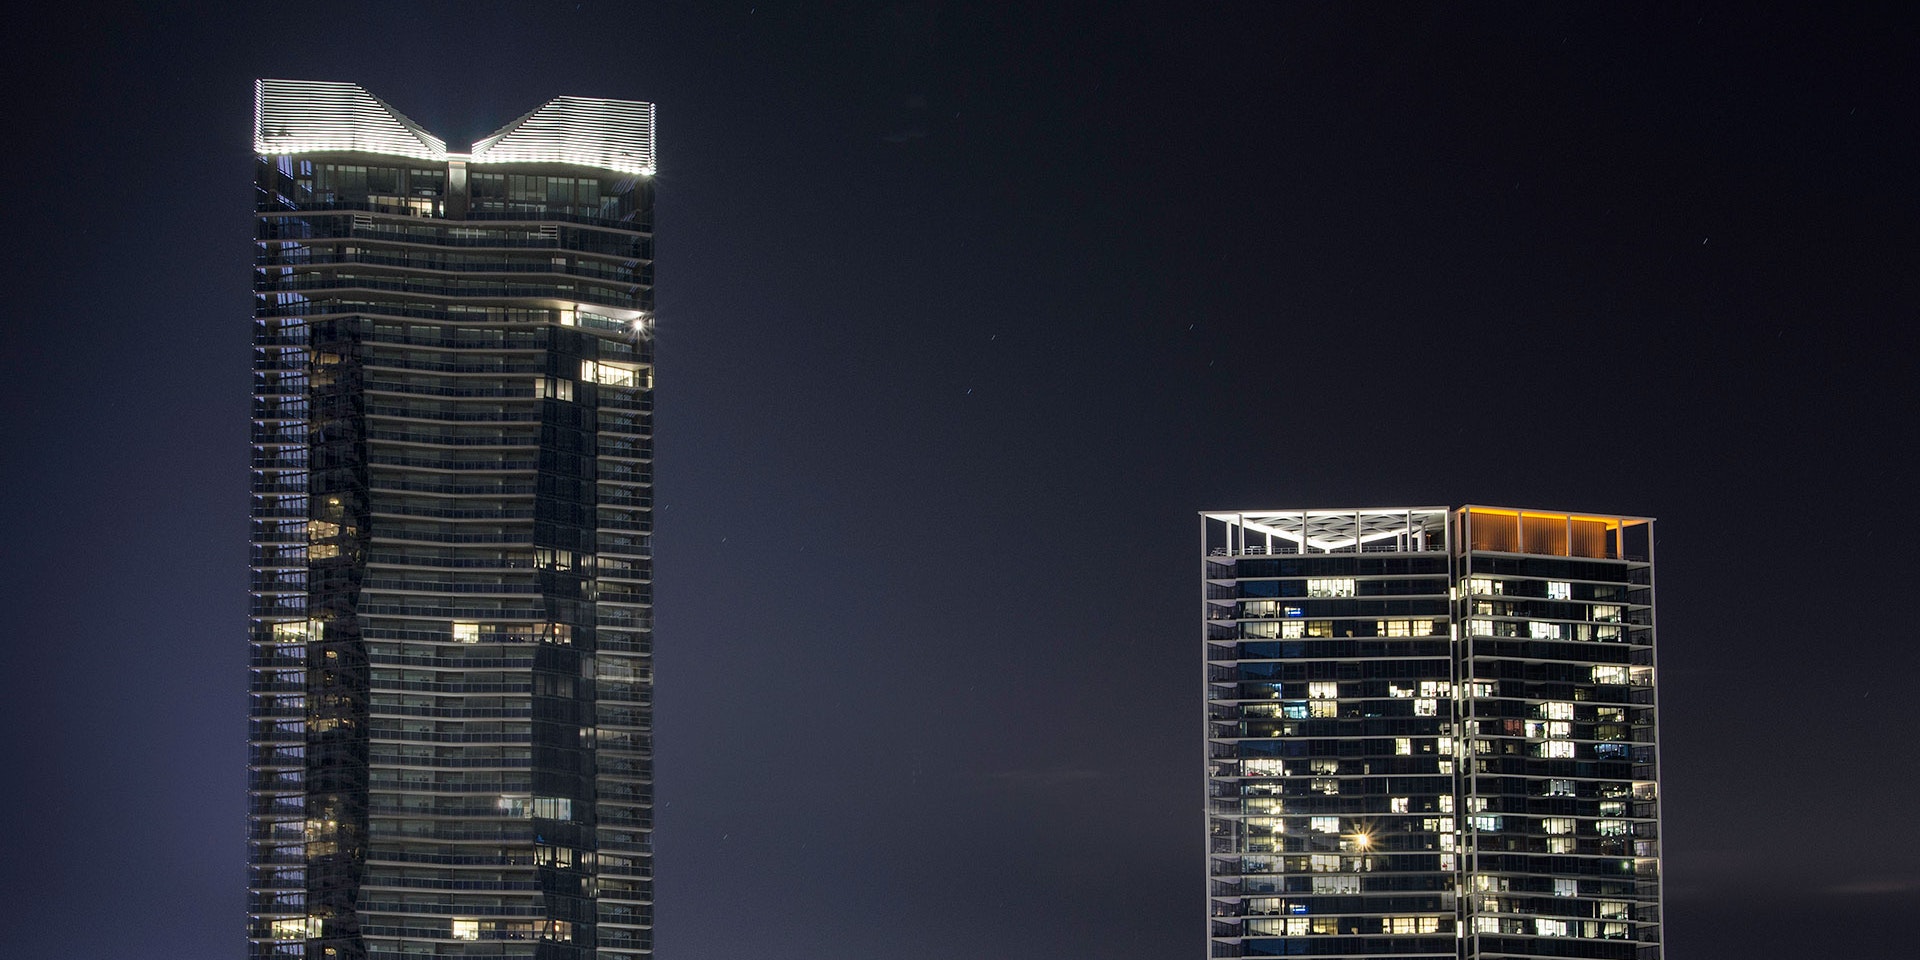 Maxis high-power linear flood light  in application, installed on Yarra Point (Tower 6). Maxis high-powered projector luminaires, complete with flare optics, are used to illuminate the architectural crown of the building.